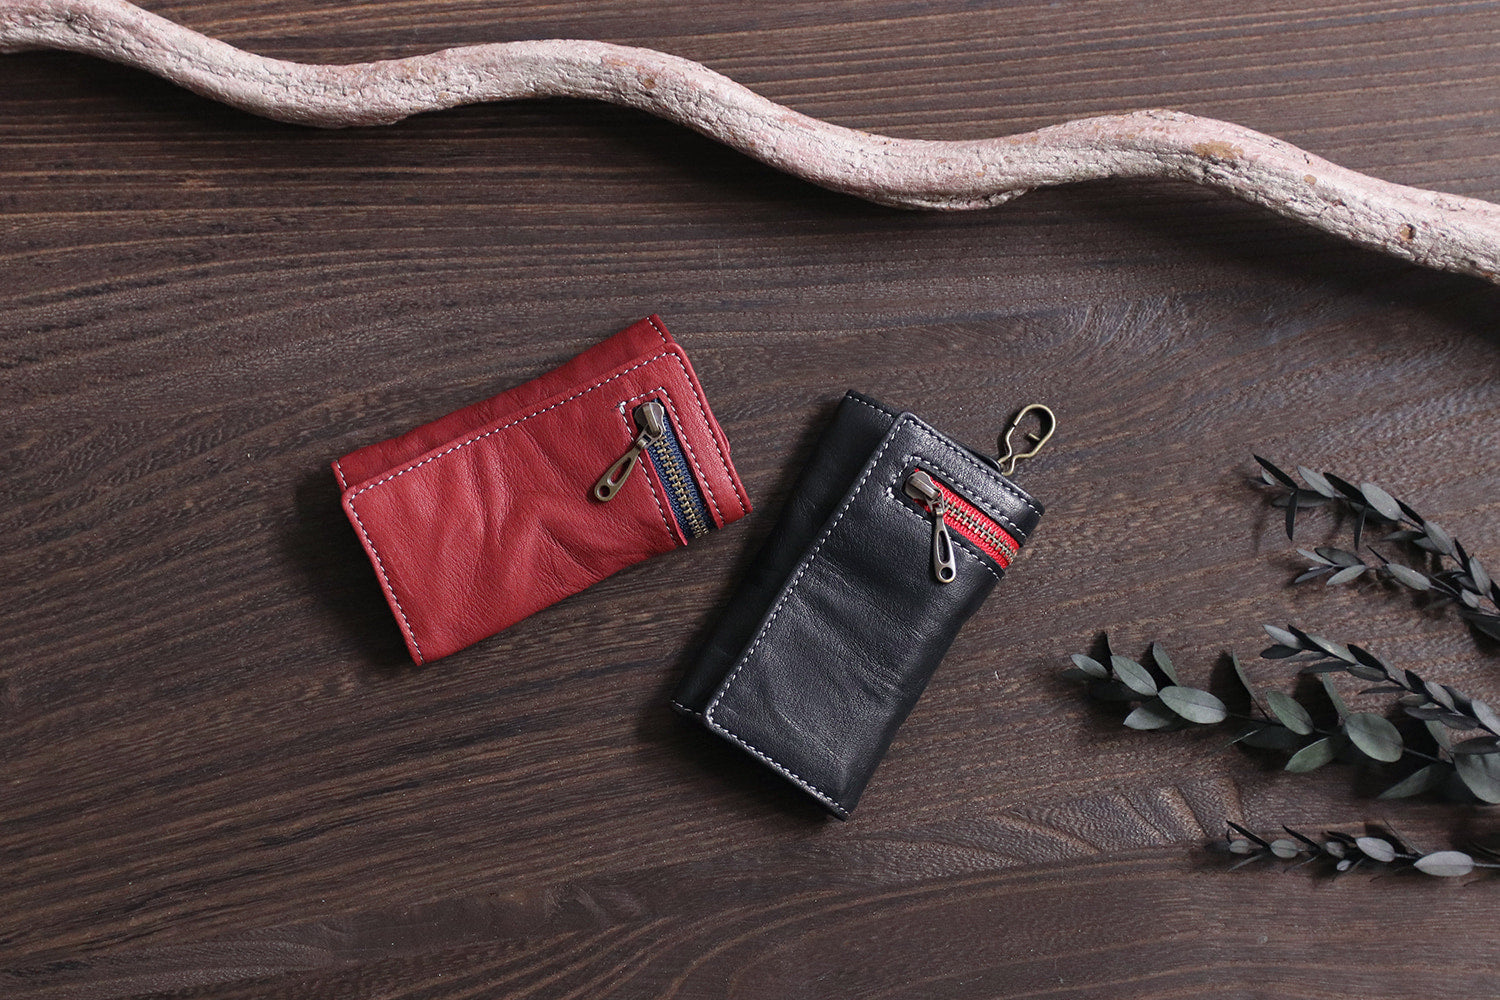 FU-SI FERNALLE /DAMAGE 301 Finishes available. A key case made of high-quality soft leather with a vintage feel.